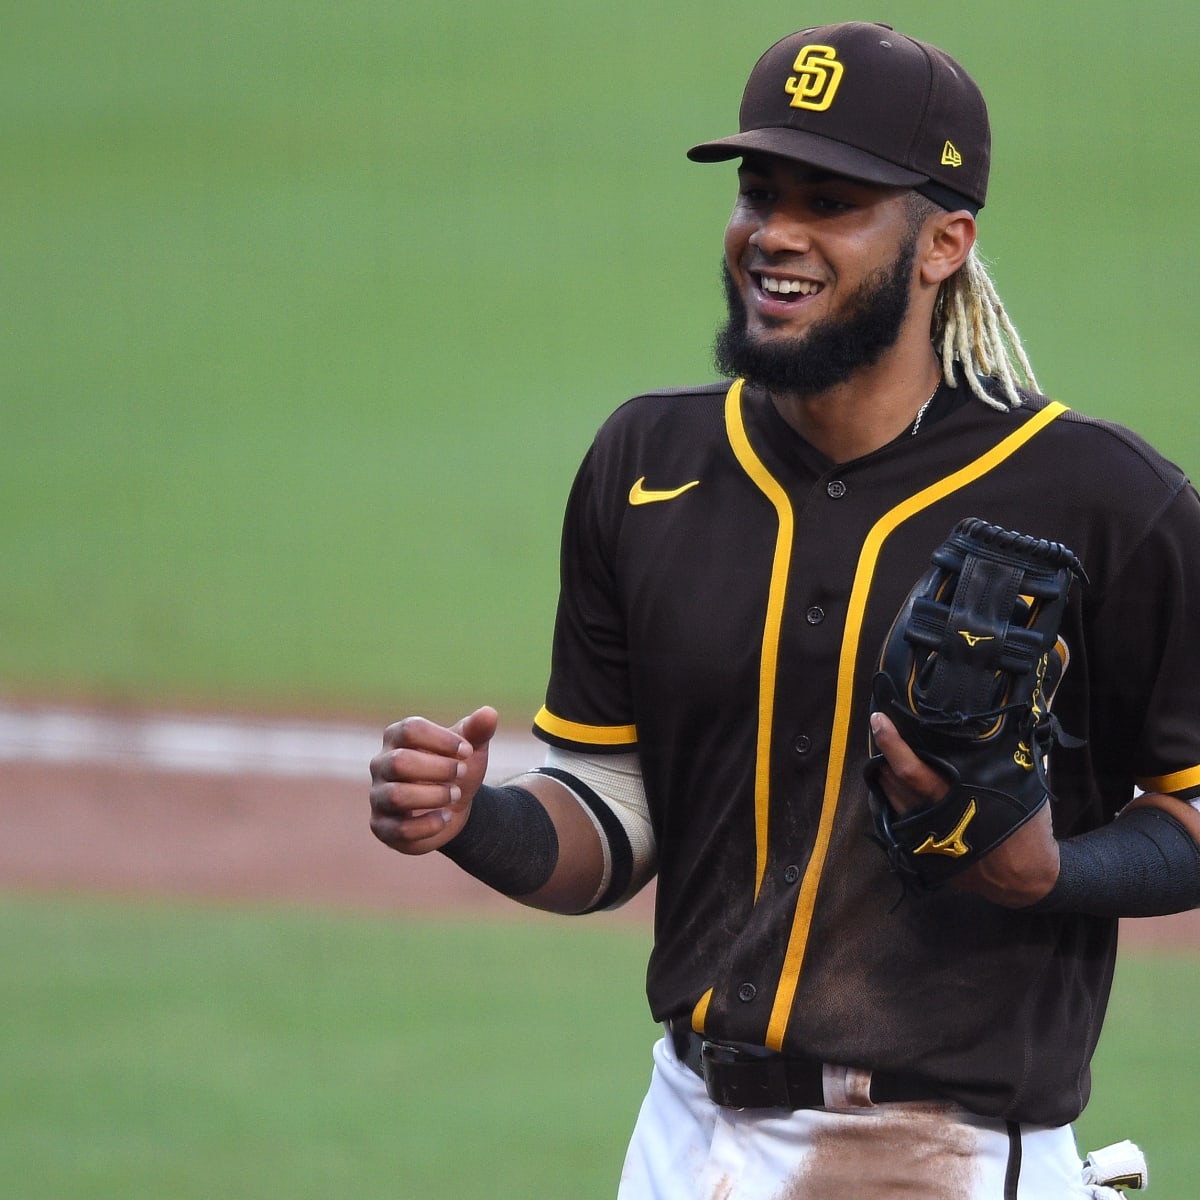 Fernando Tatis Jr. Is The Star The Padres Couldn't Afford To Let Get Away —  College Baseball, MLB Draft, Prospects - Baseball America